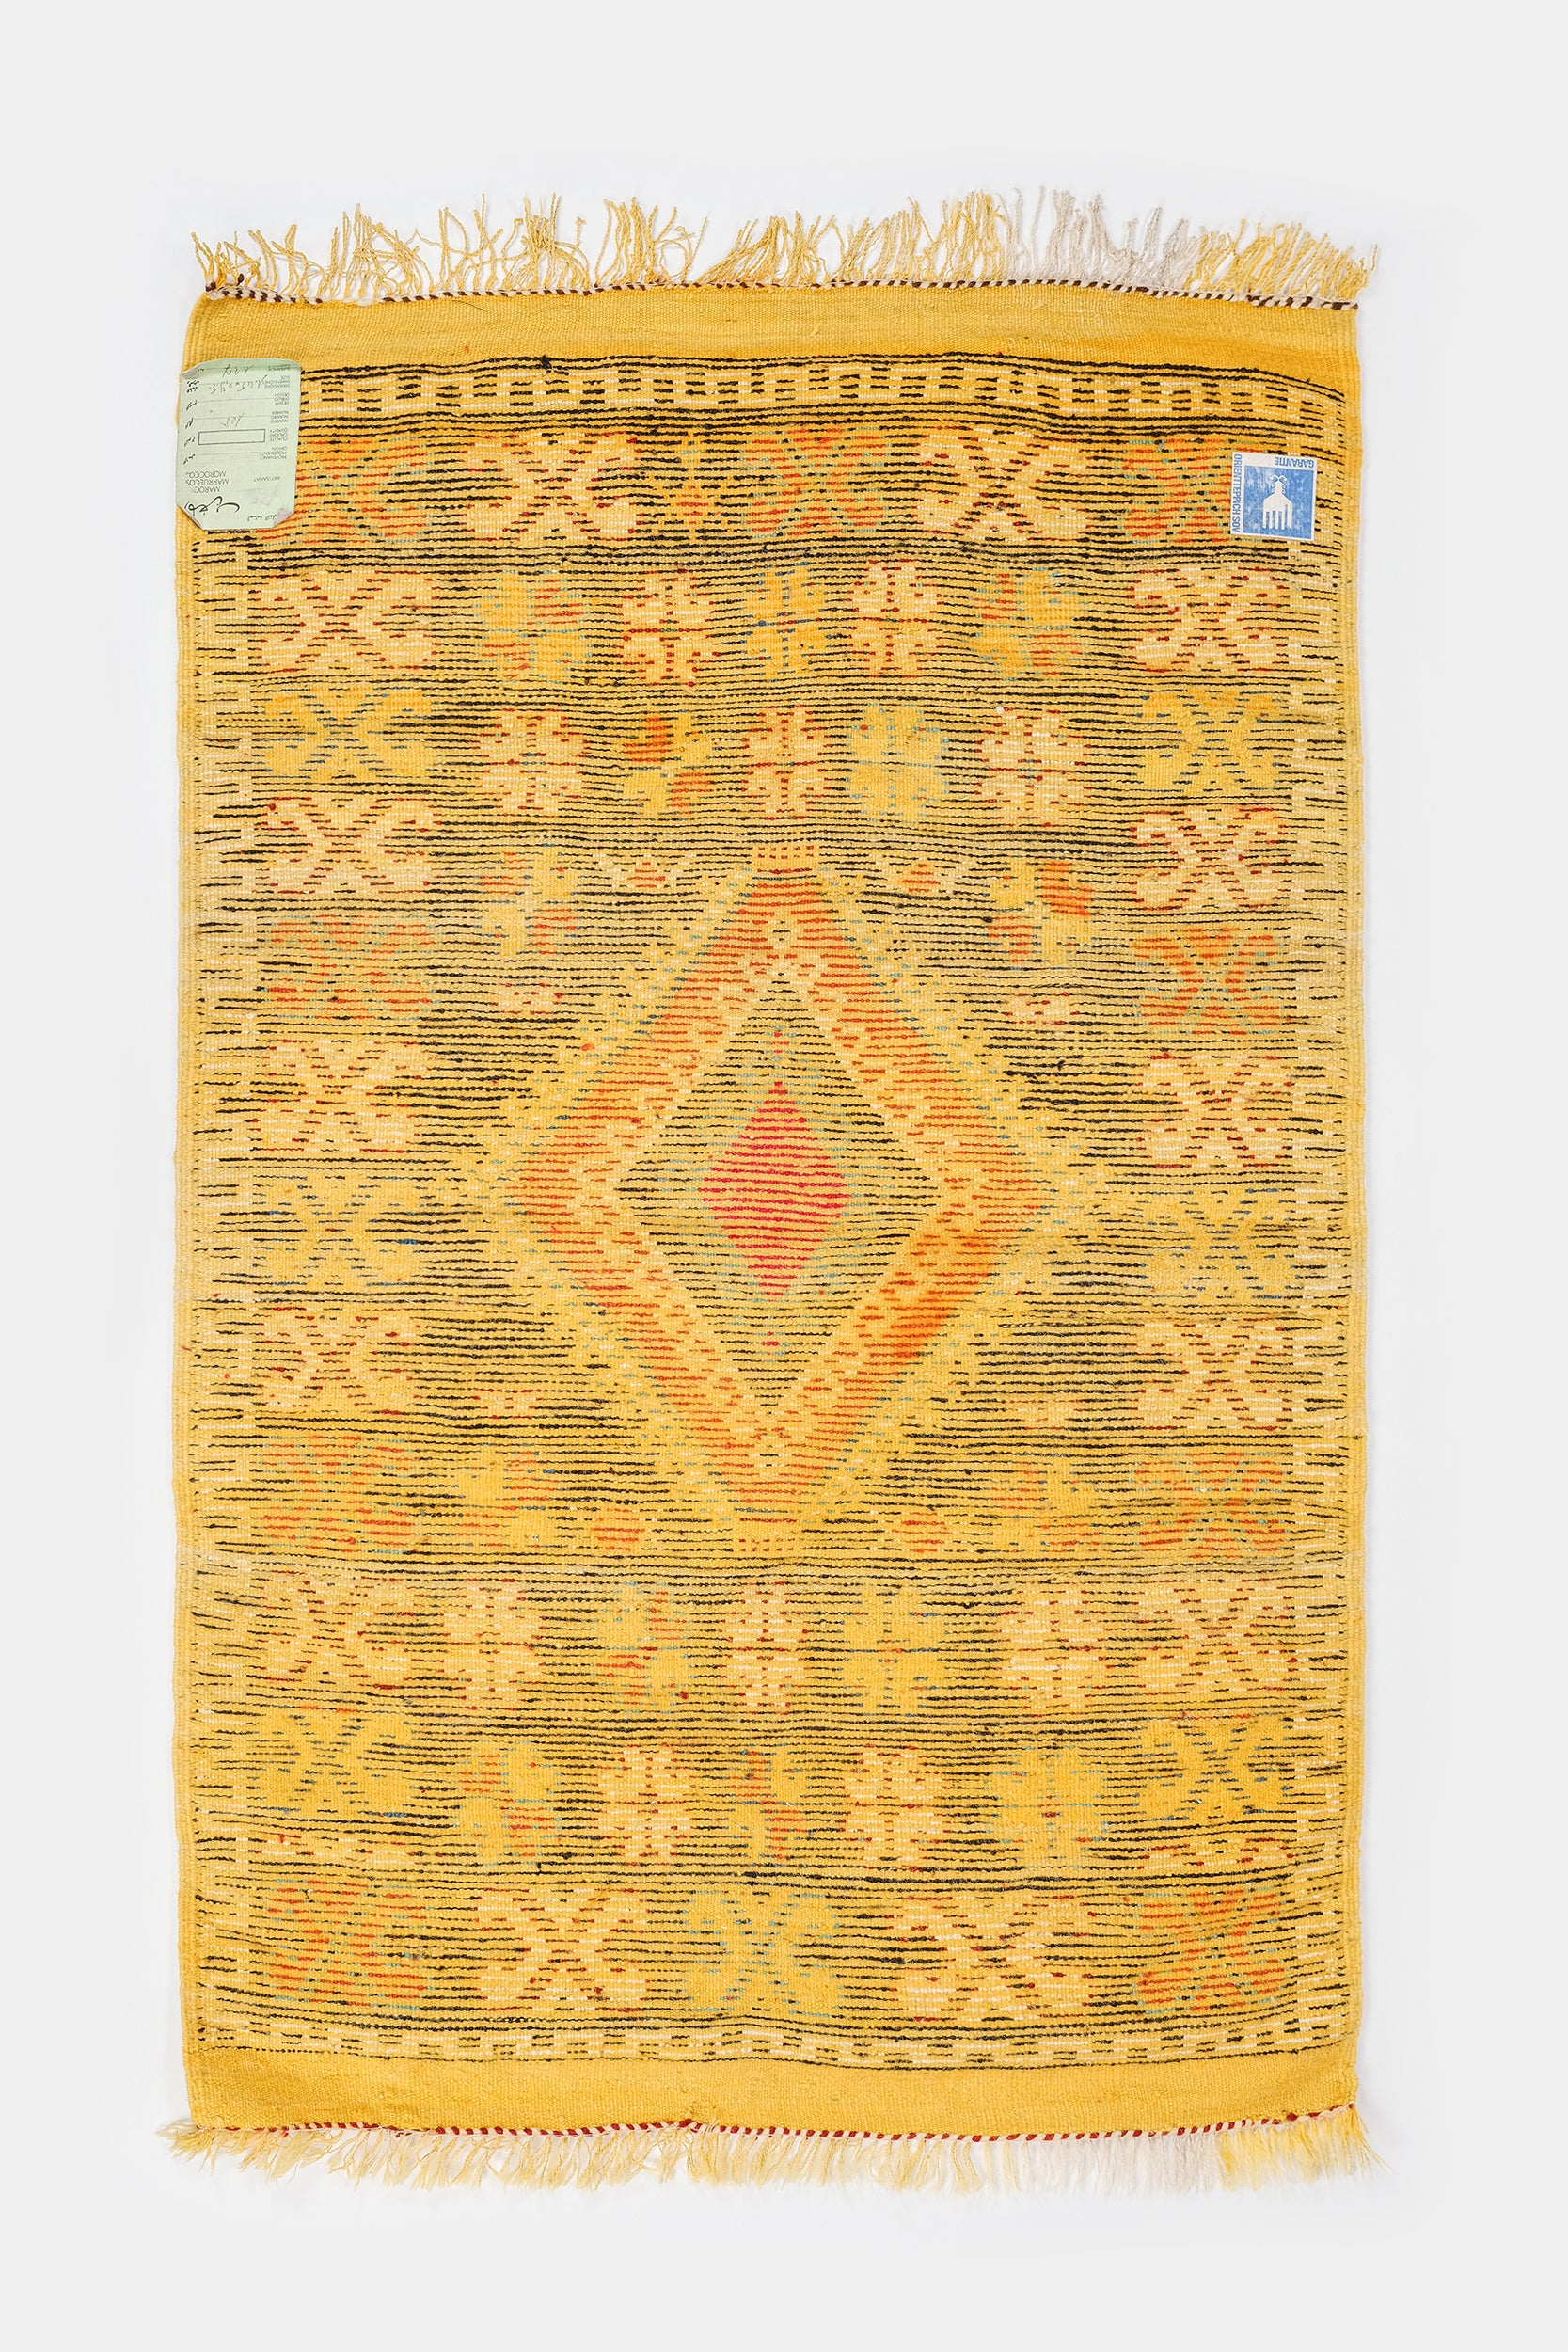 Moroccan barber carpet from the Atlas 40s